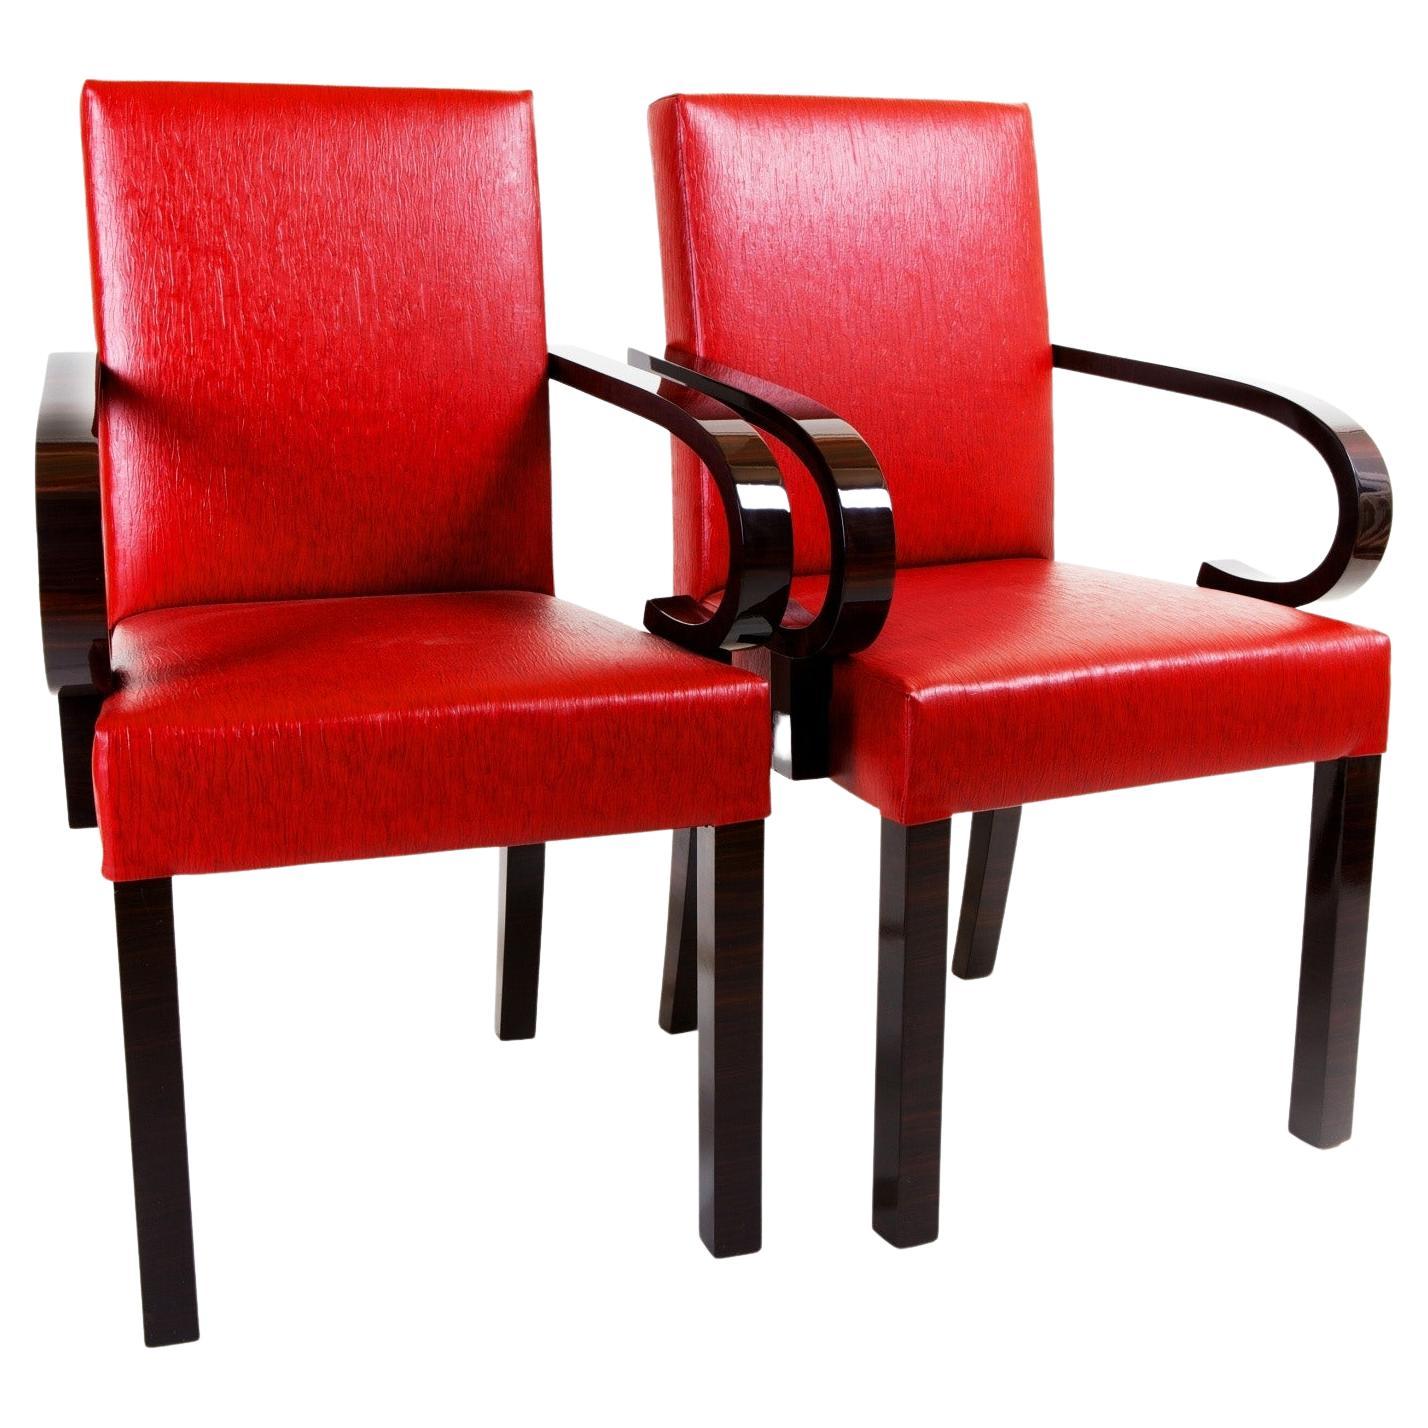 Red Leather Armchairs, Art Deco, Made in 1920s France, Designed by Dominique For Sale